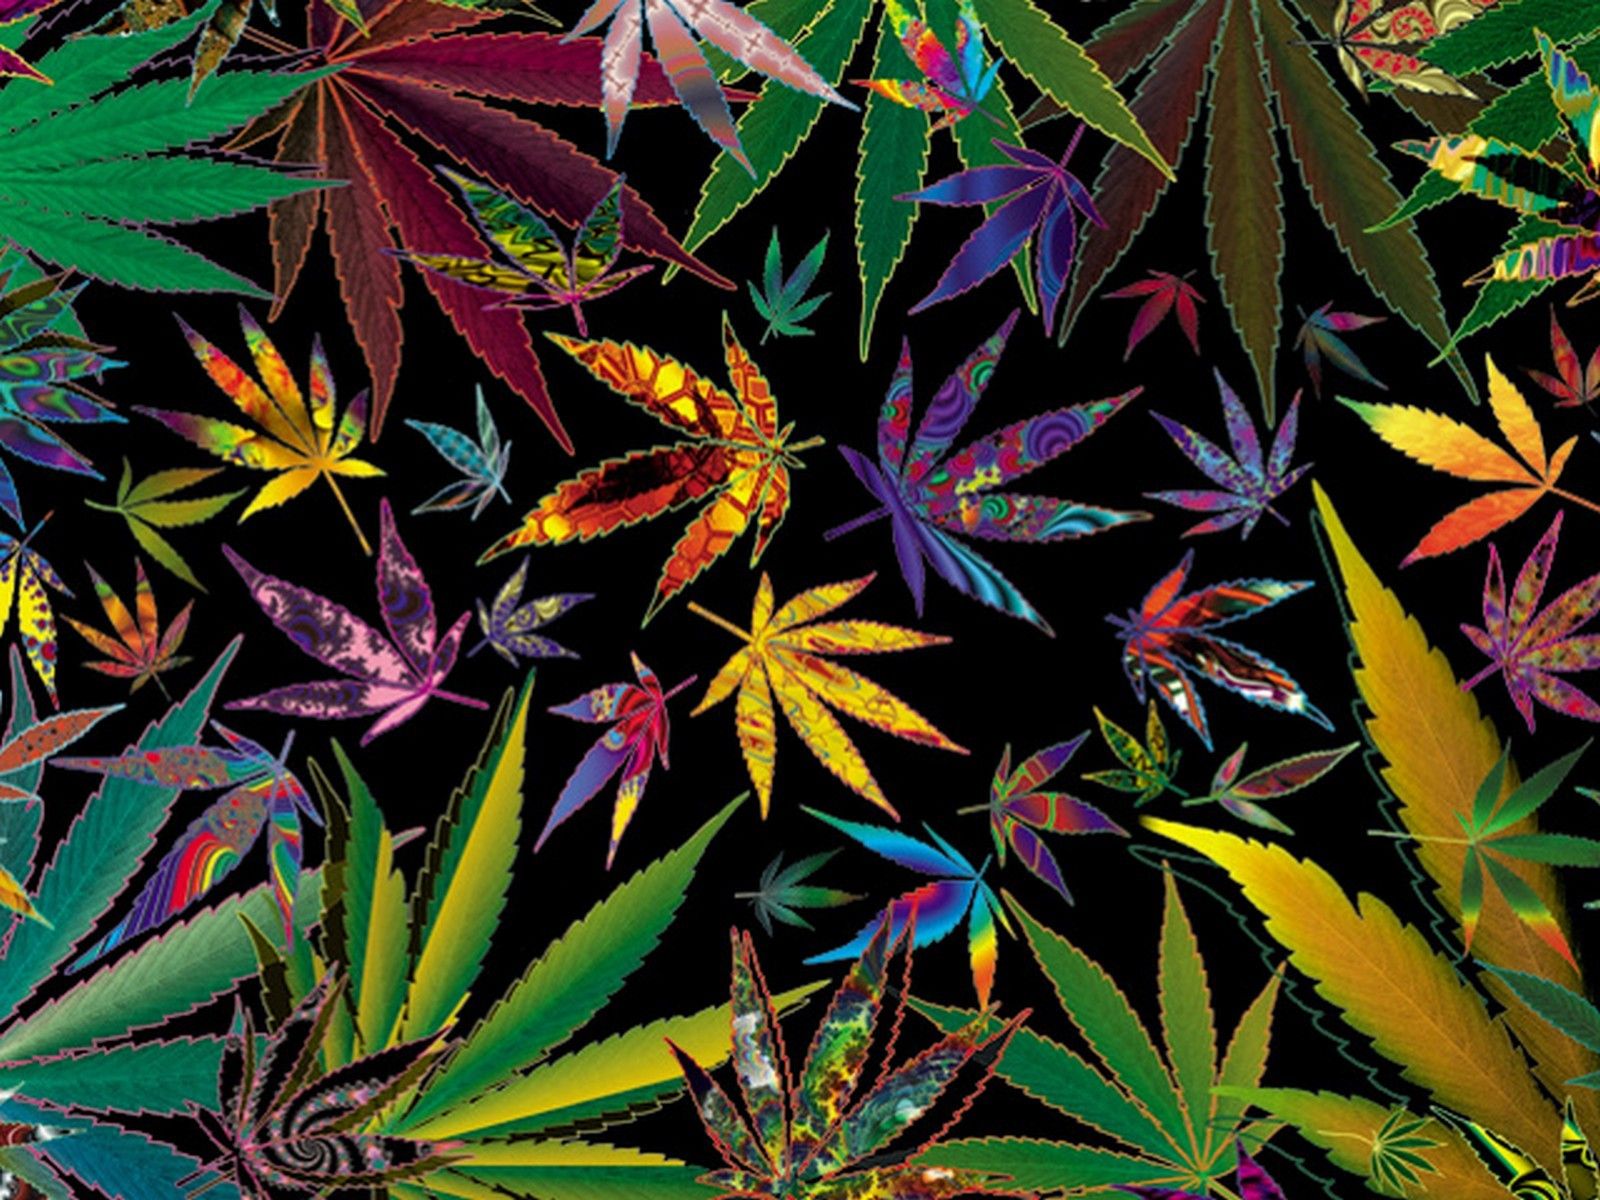 50+] Trippy Stoner Wallpapers